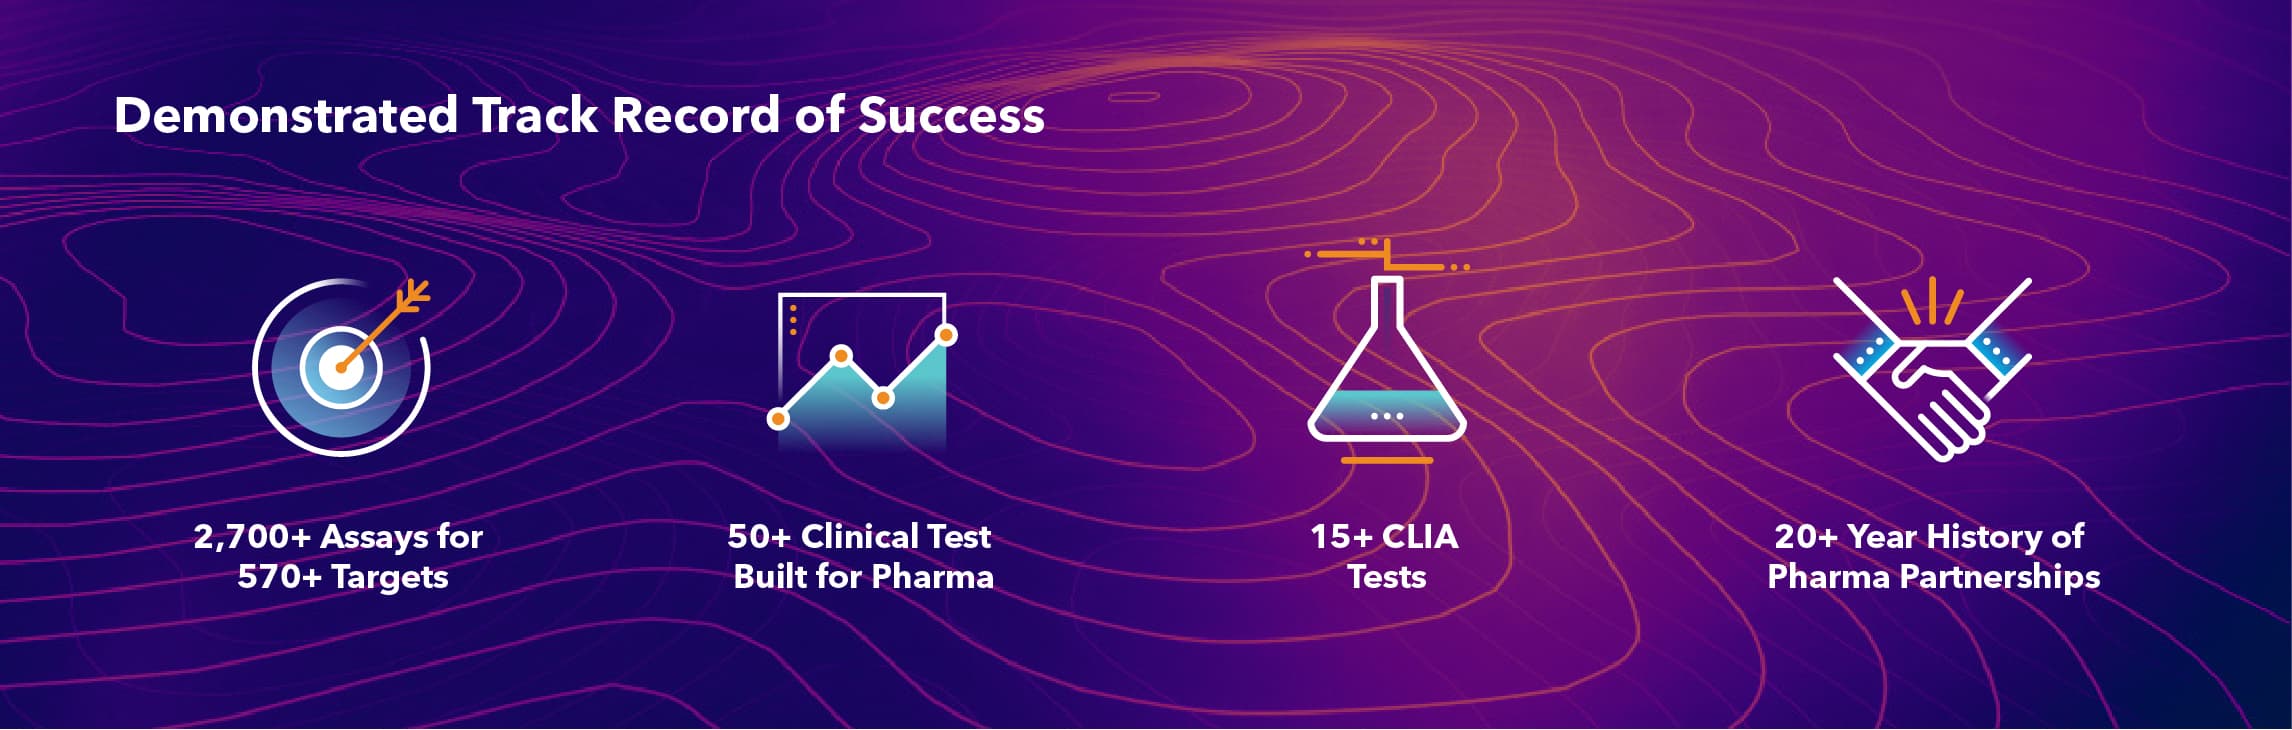 CDx Demonstrated Track Record of Success in Clinical Trial Assay Development